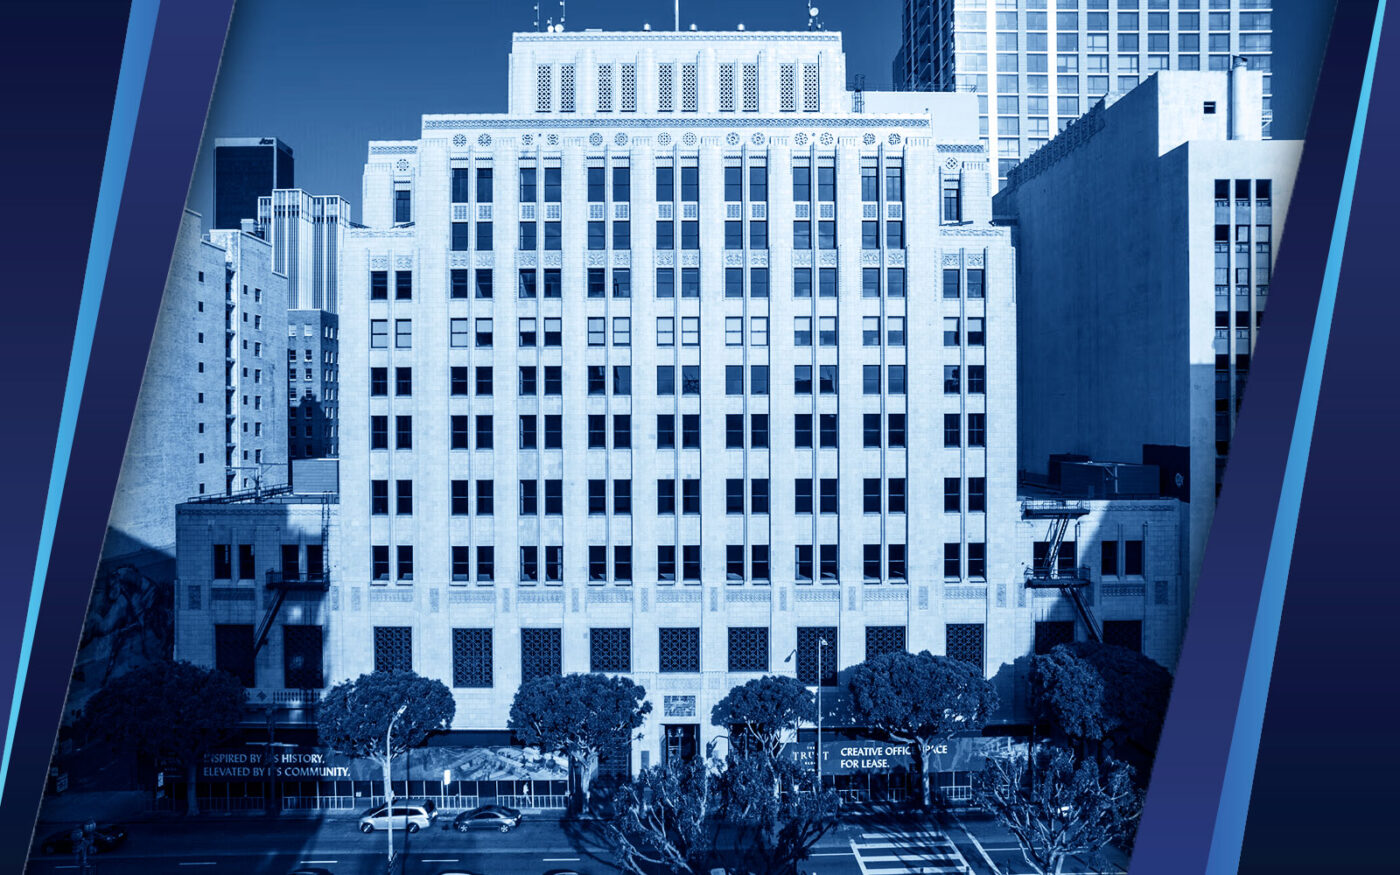 The Trust Building at 433 S Spring Street in Los Angeles